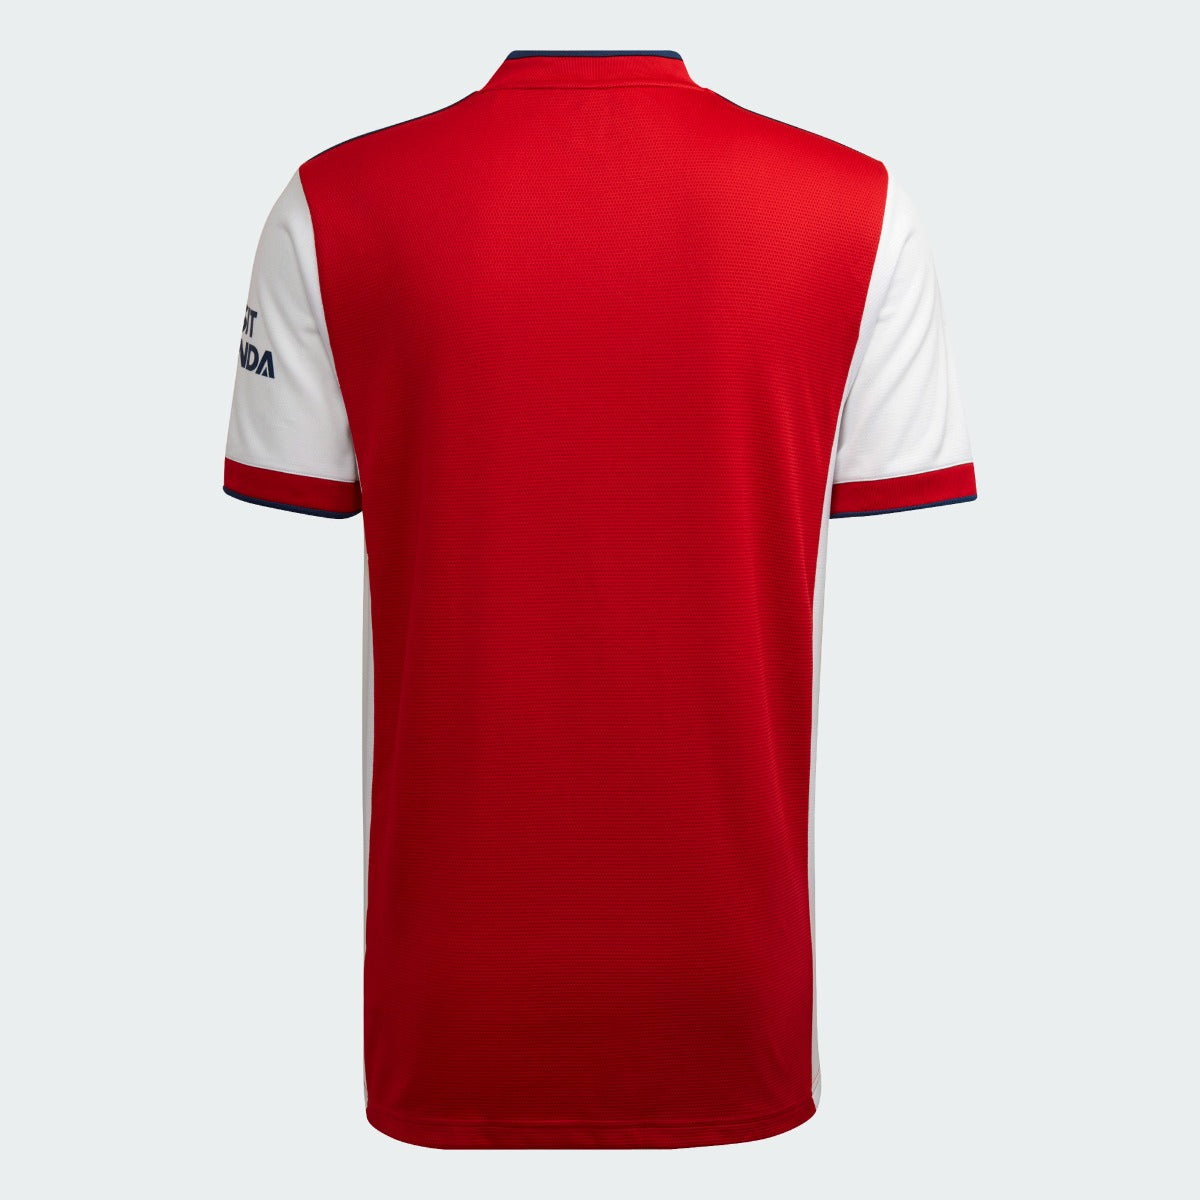 Adidas 2021-22 Arsenal Home Jersey - Red-Navy (Back)